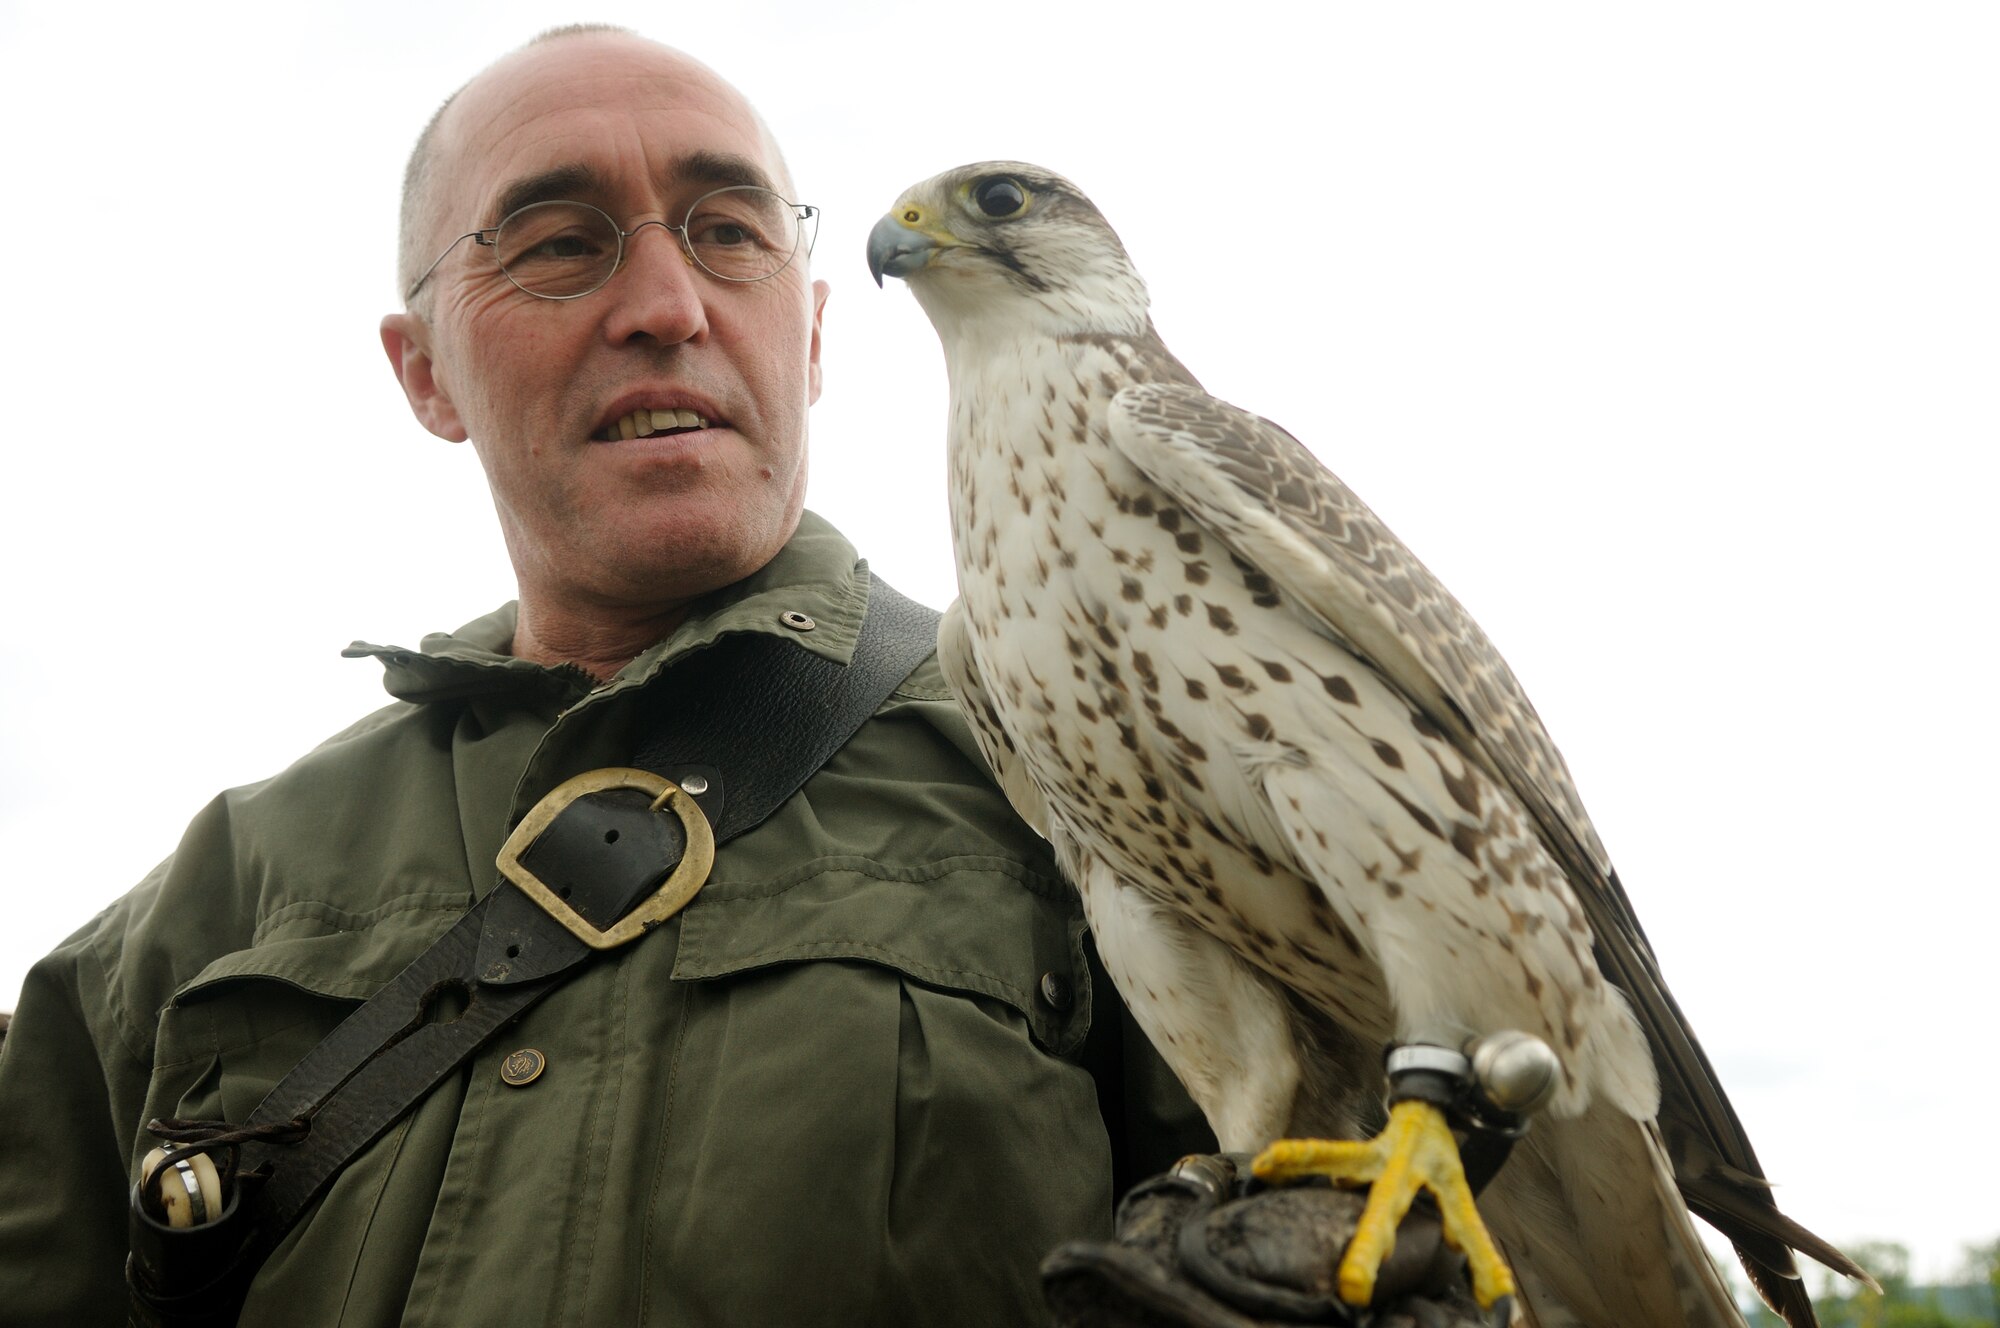 SPANGDAHLEM AIR BASE, Germany – Ronald Leu, 52nd Civil Engineer Squadron base falconer, holds Gina, a five-year-old falcon, July 29.  Gina, a mix of both saker falcon and gyrfalcon breeds, is trained to hunt wildlife near the flightline to help prevent aircraft damage.  (U.S. Air Force photo/Staff Sgt. Logan Tuttle)